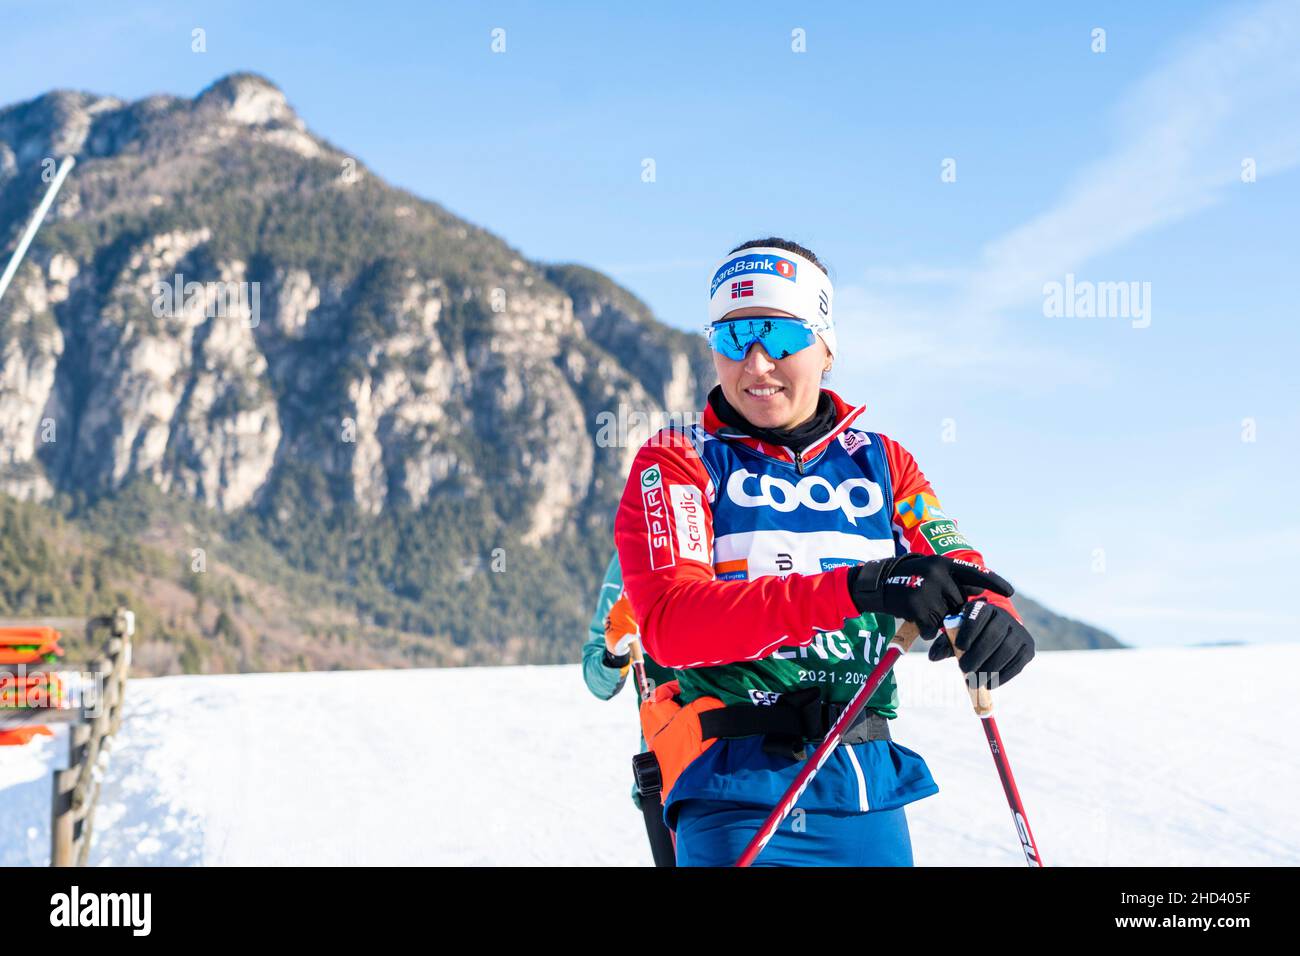 Lake Tesero, Italy 20220102.Tiril Udnes Weng during training in Val di Fiemme before the last two stages of Tour de Ski. Photo: Terje Pedersen / NTB Stock Photo